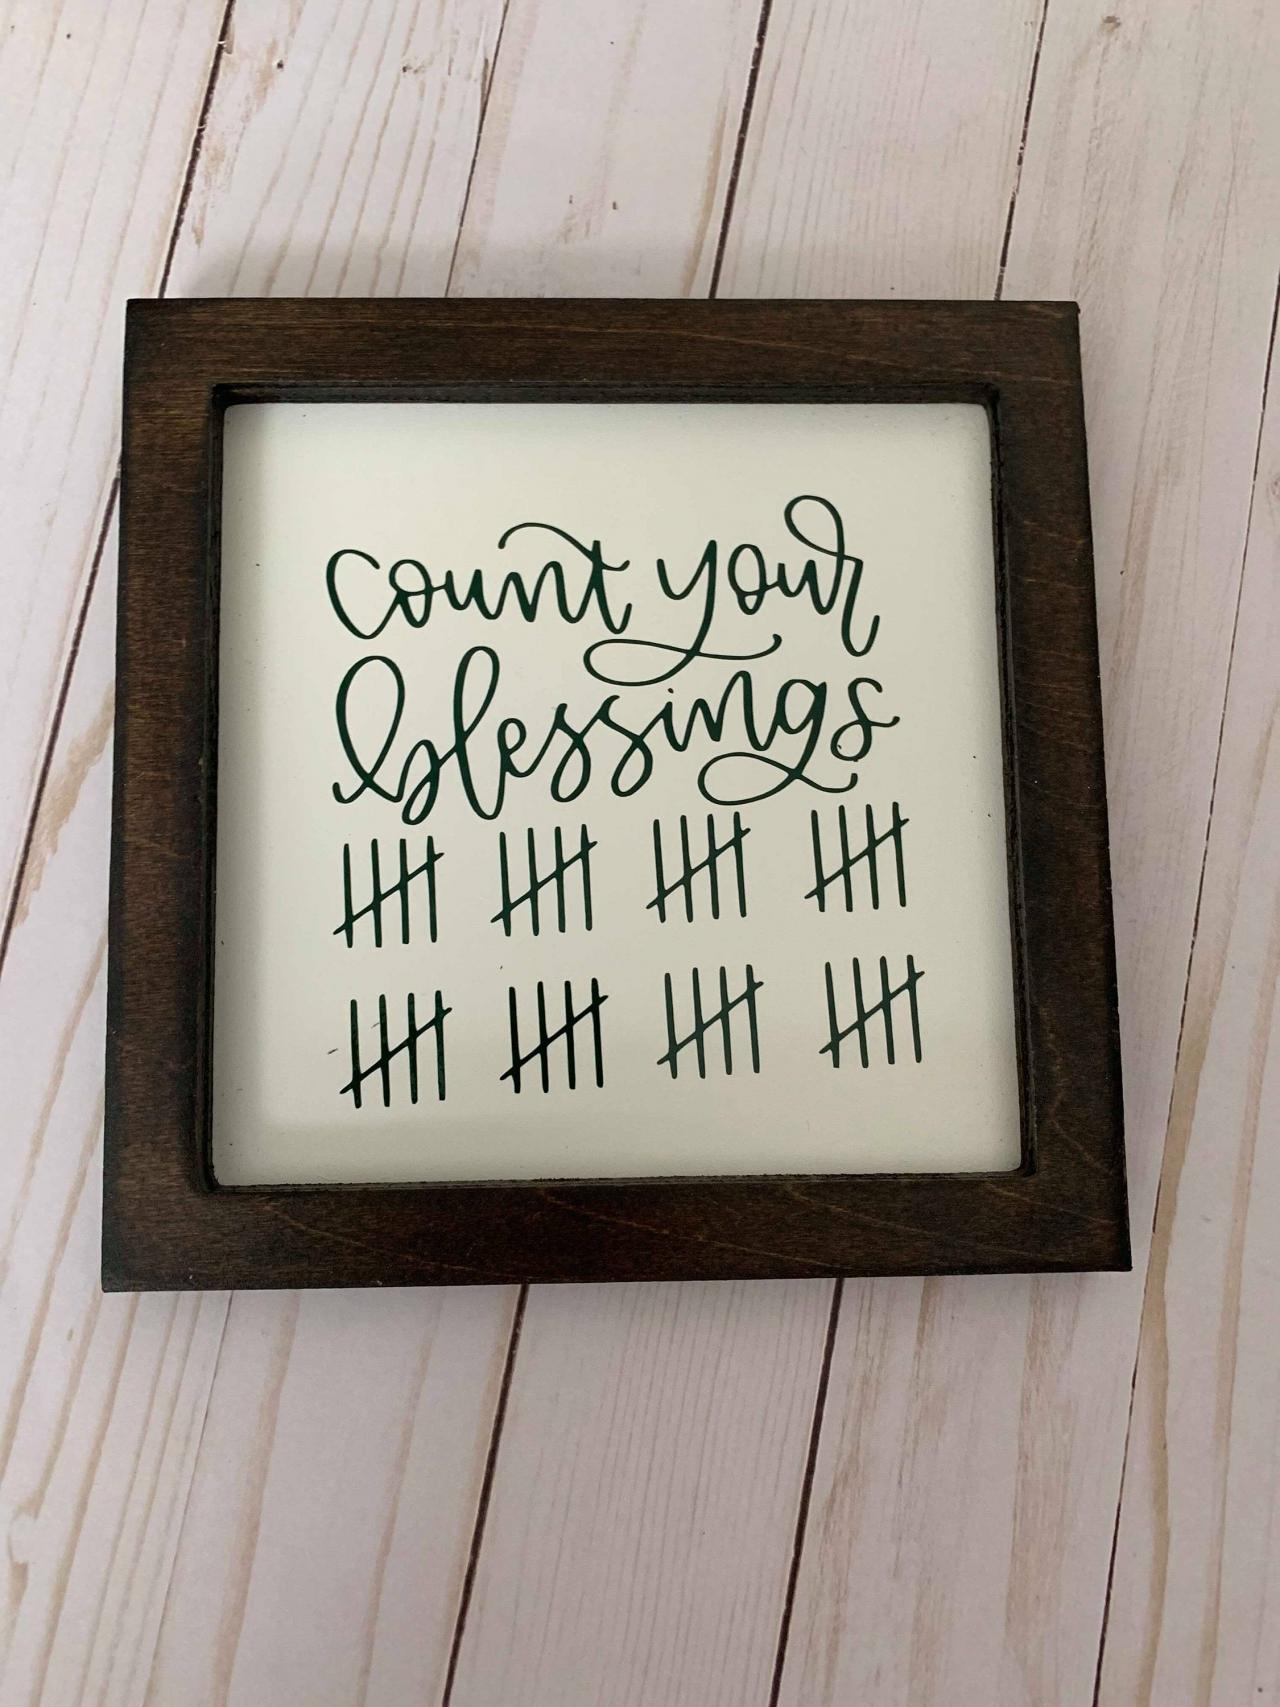 count your blessings sign